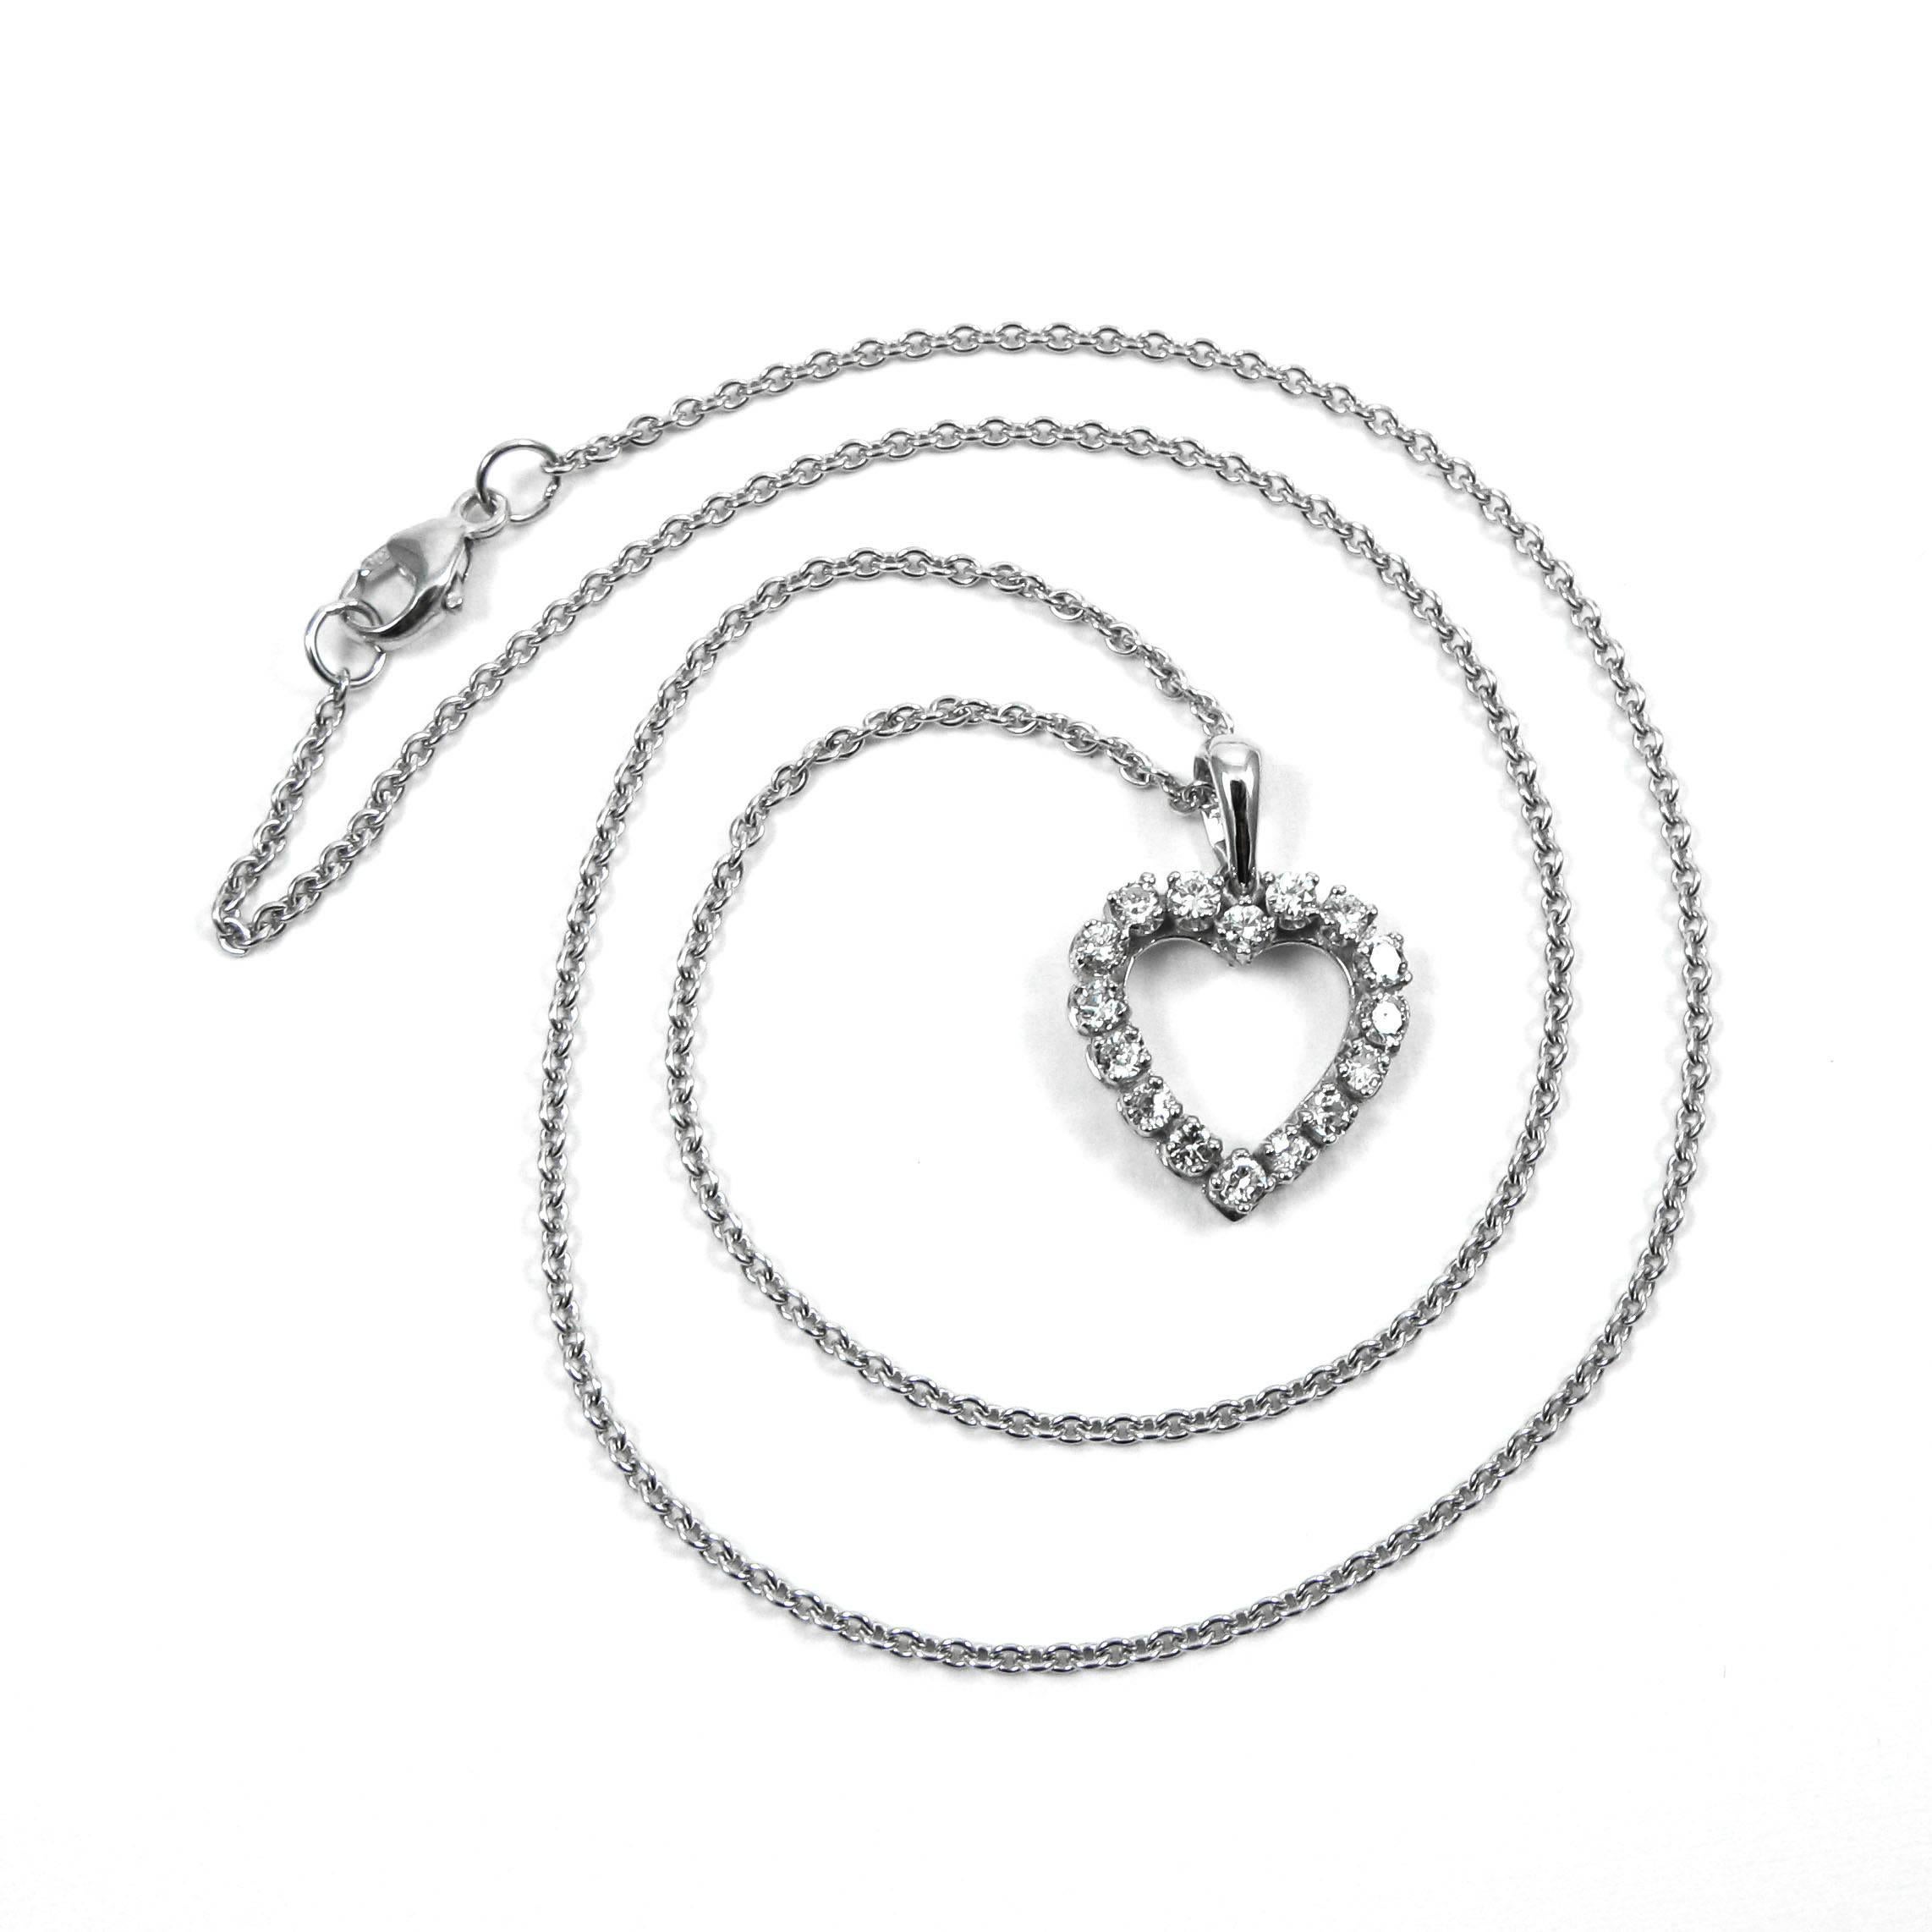 Women's or Men's 0.96 Carat Total Diamond and White Gold Heart Pendant Necklace